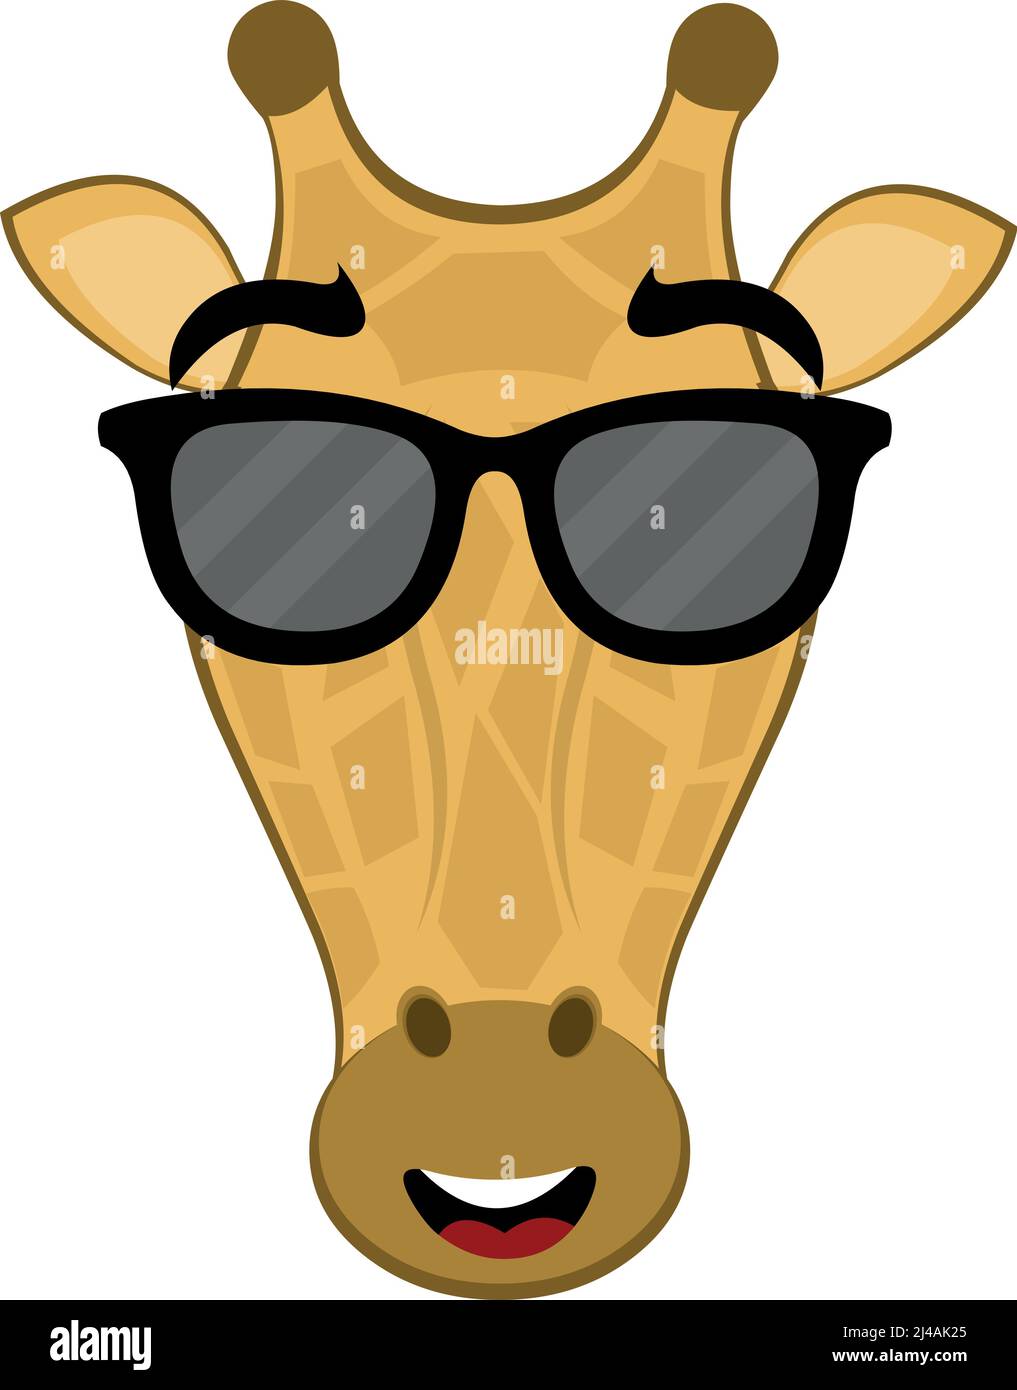 Vector Illustration Of The Face Of A Cartoon Giraffe With Sunglasses Stock Vector Image And Art